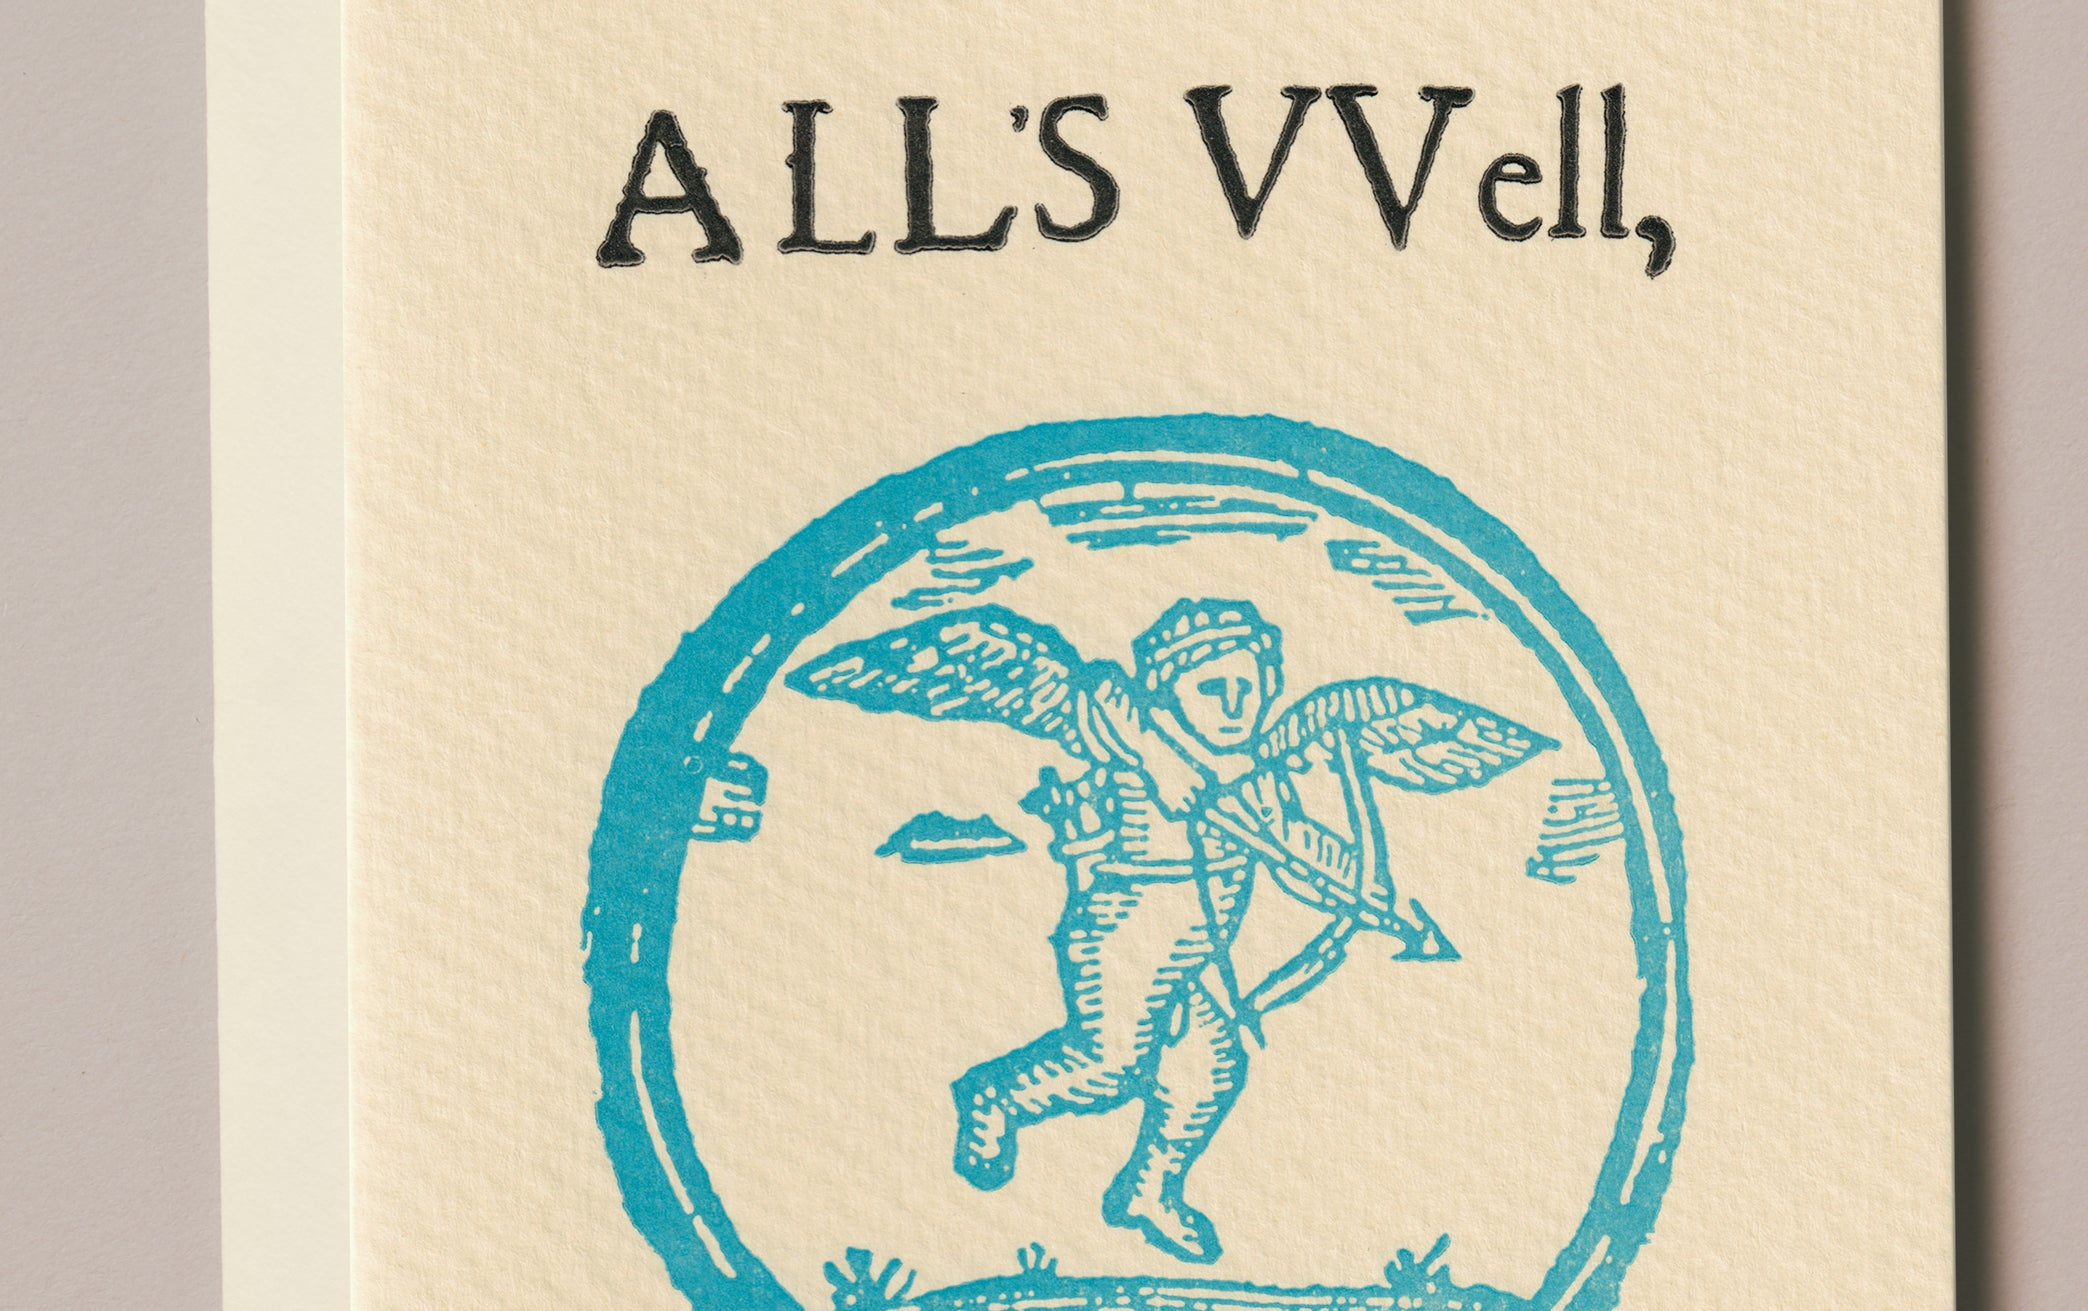 Shakespeare's First Folio Letterpress Greeting Card, All's Well that Ends Well